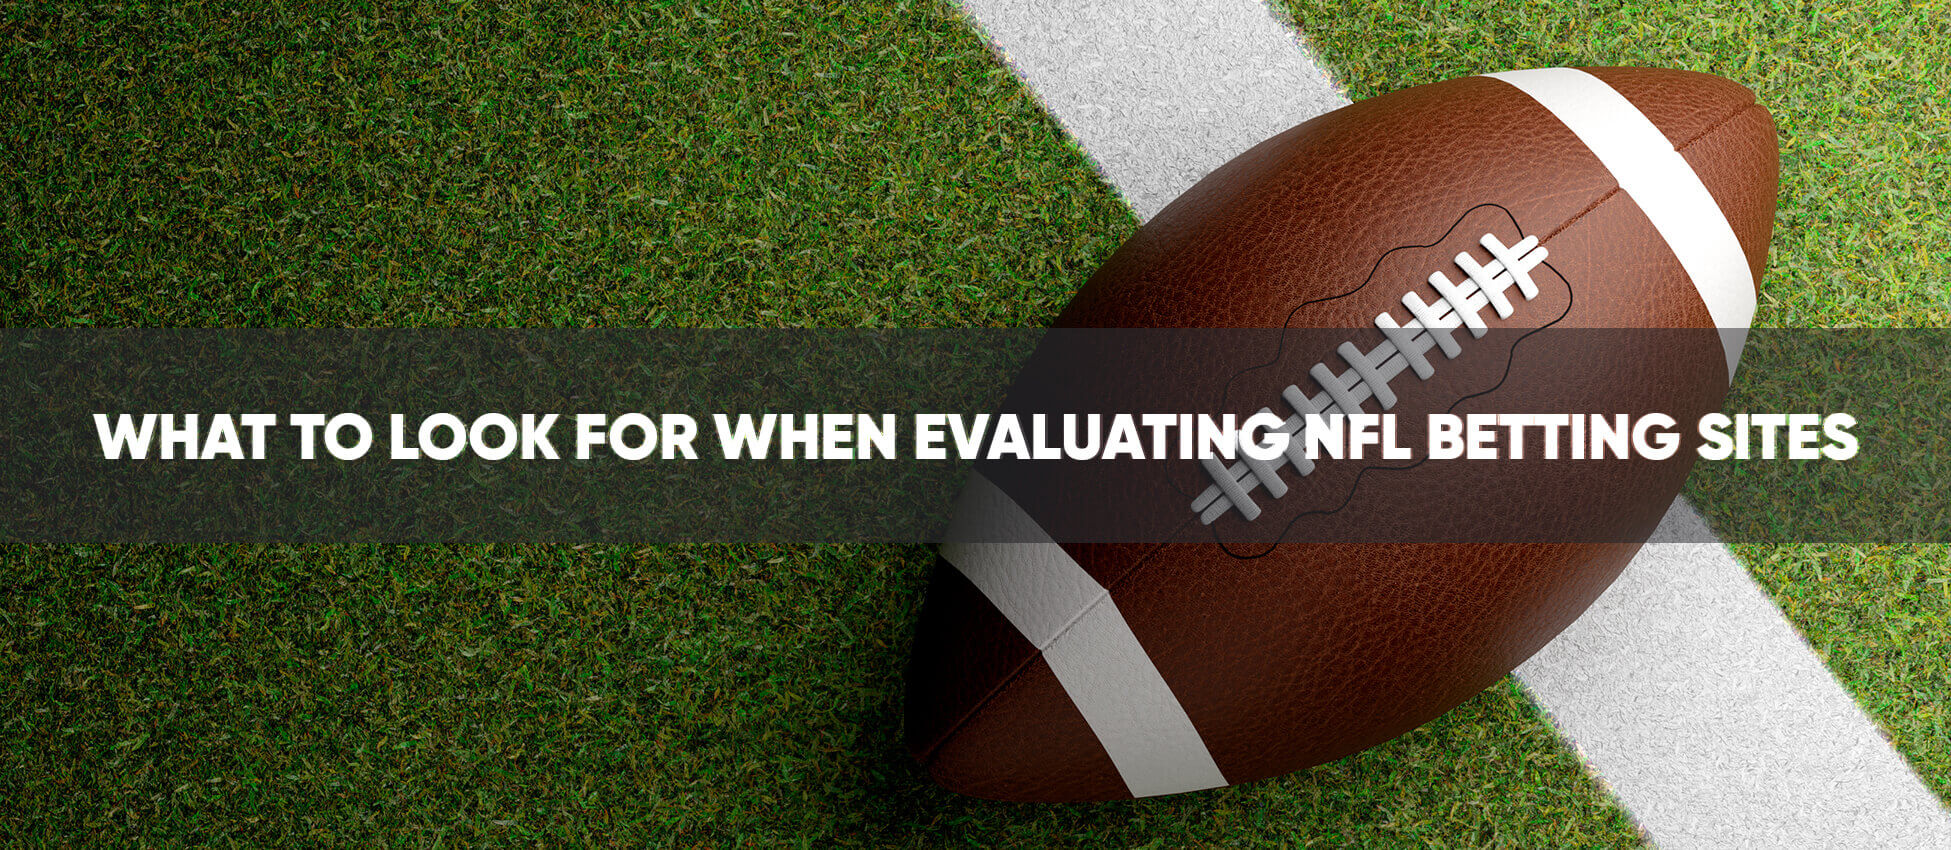 What to Look for When Evaluating NFL Betting Sites